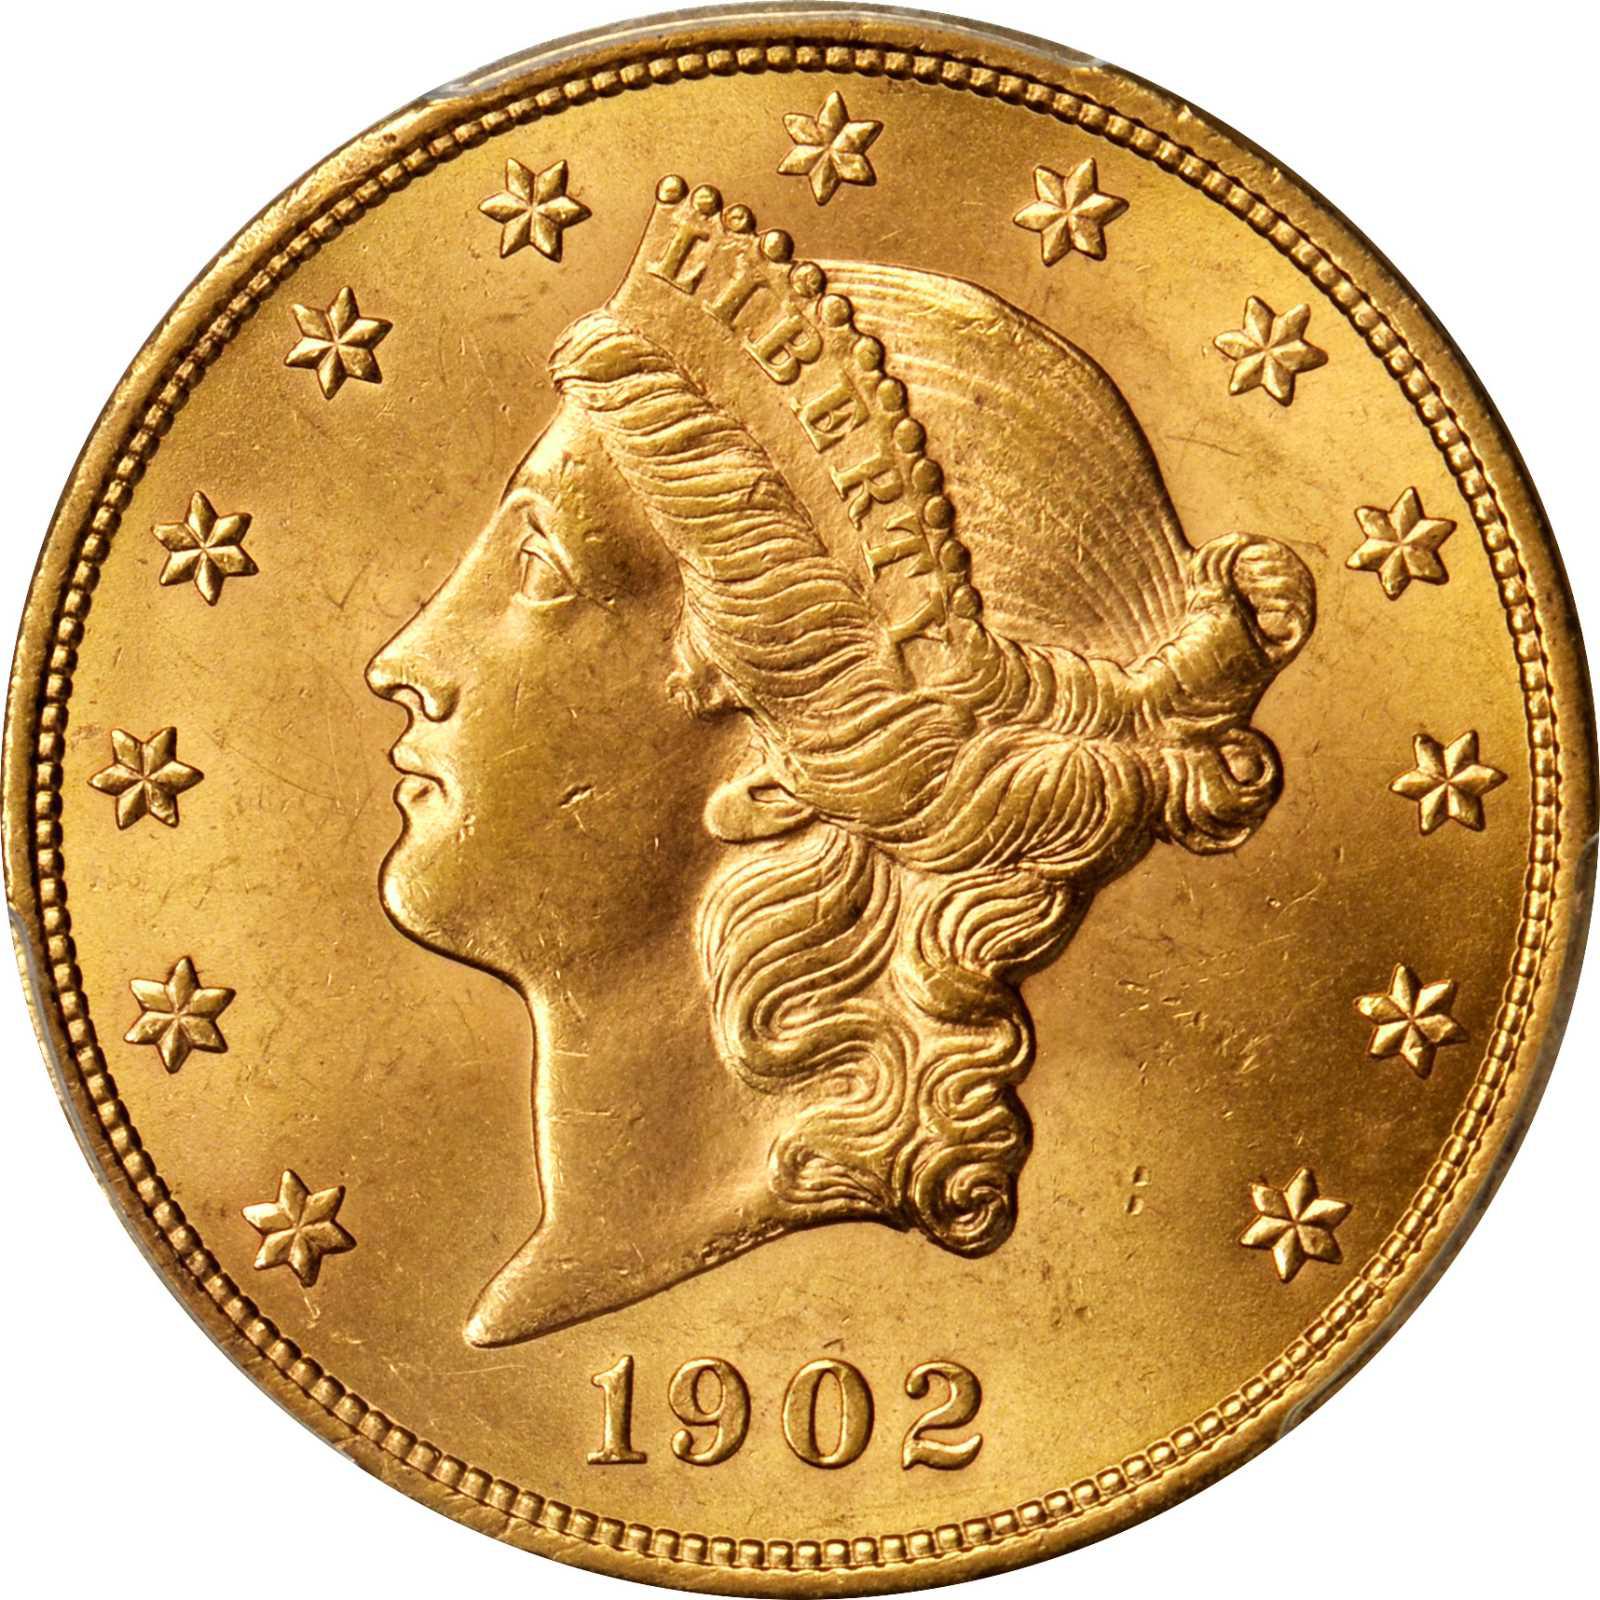 value of dollar gold coins